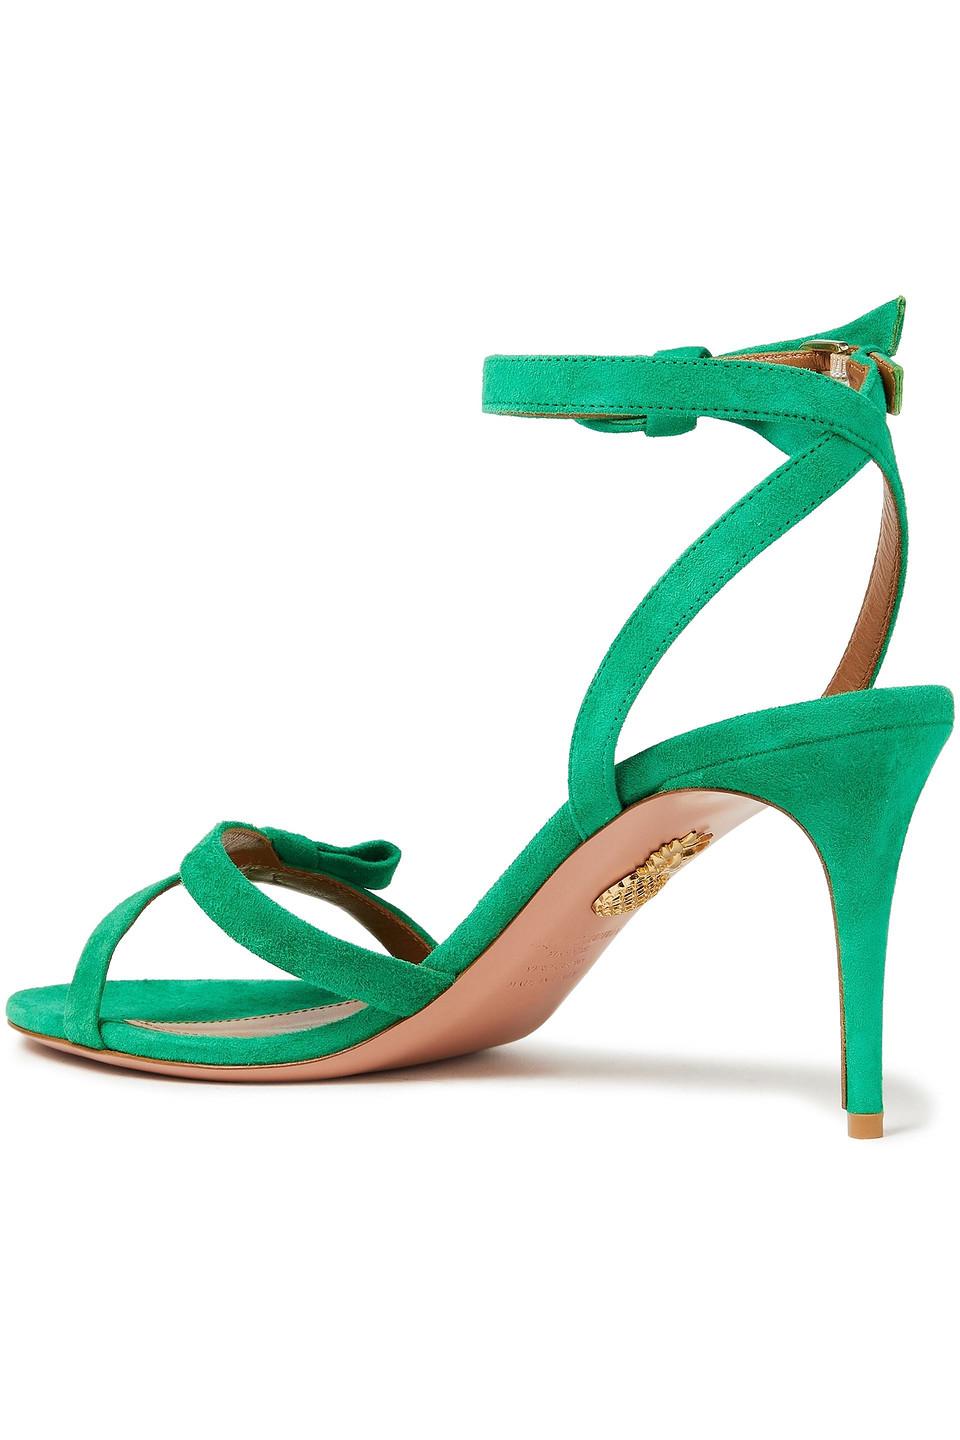 Aquazzura Passion 75 Knotted Suede Sandals in Green | Lyst